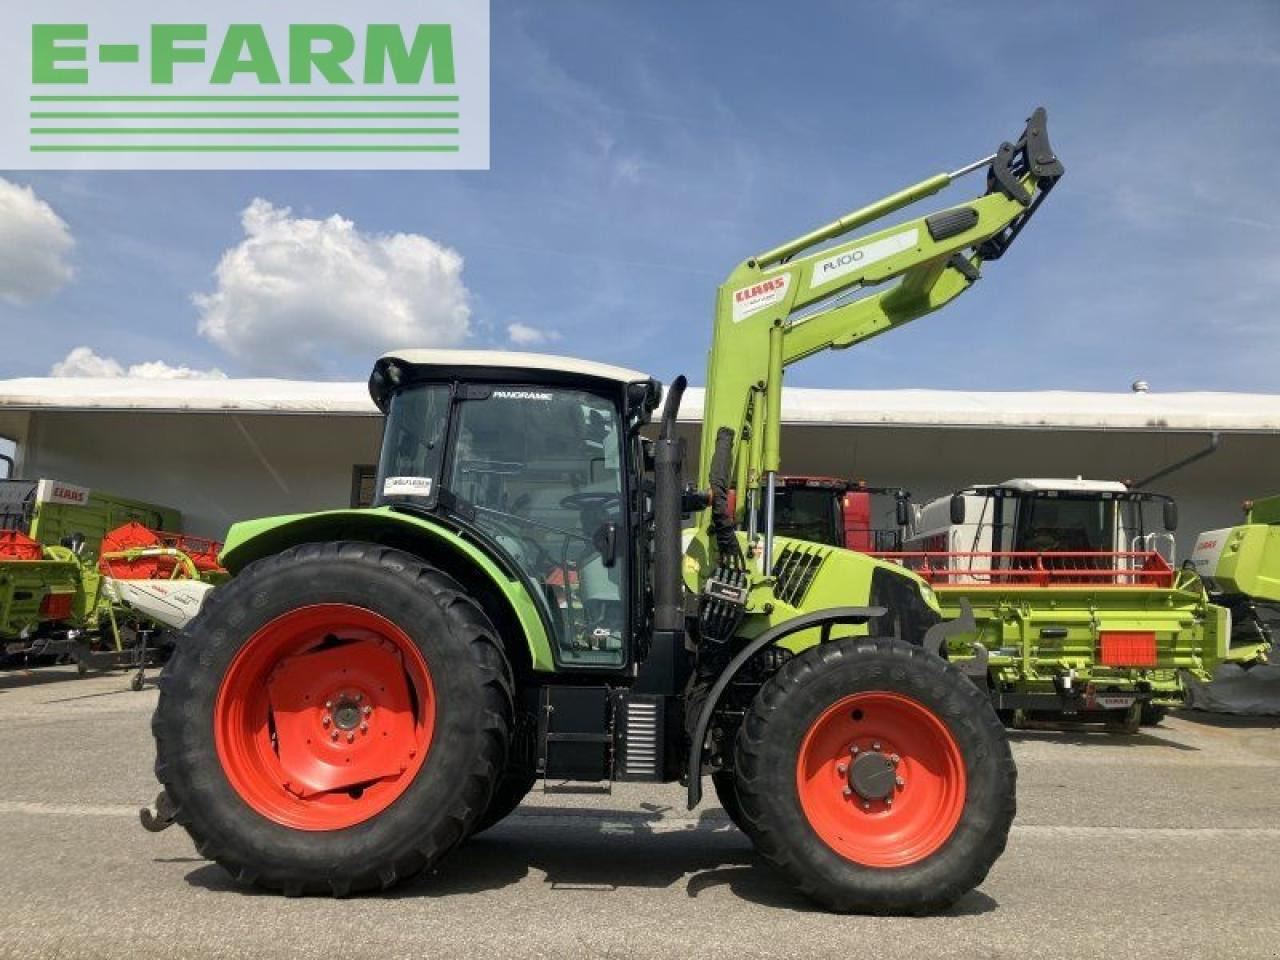 Farm tractor CLAAS arion 450 cis panoramic